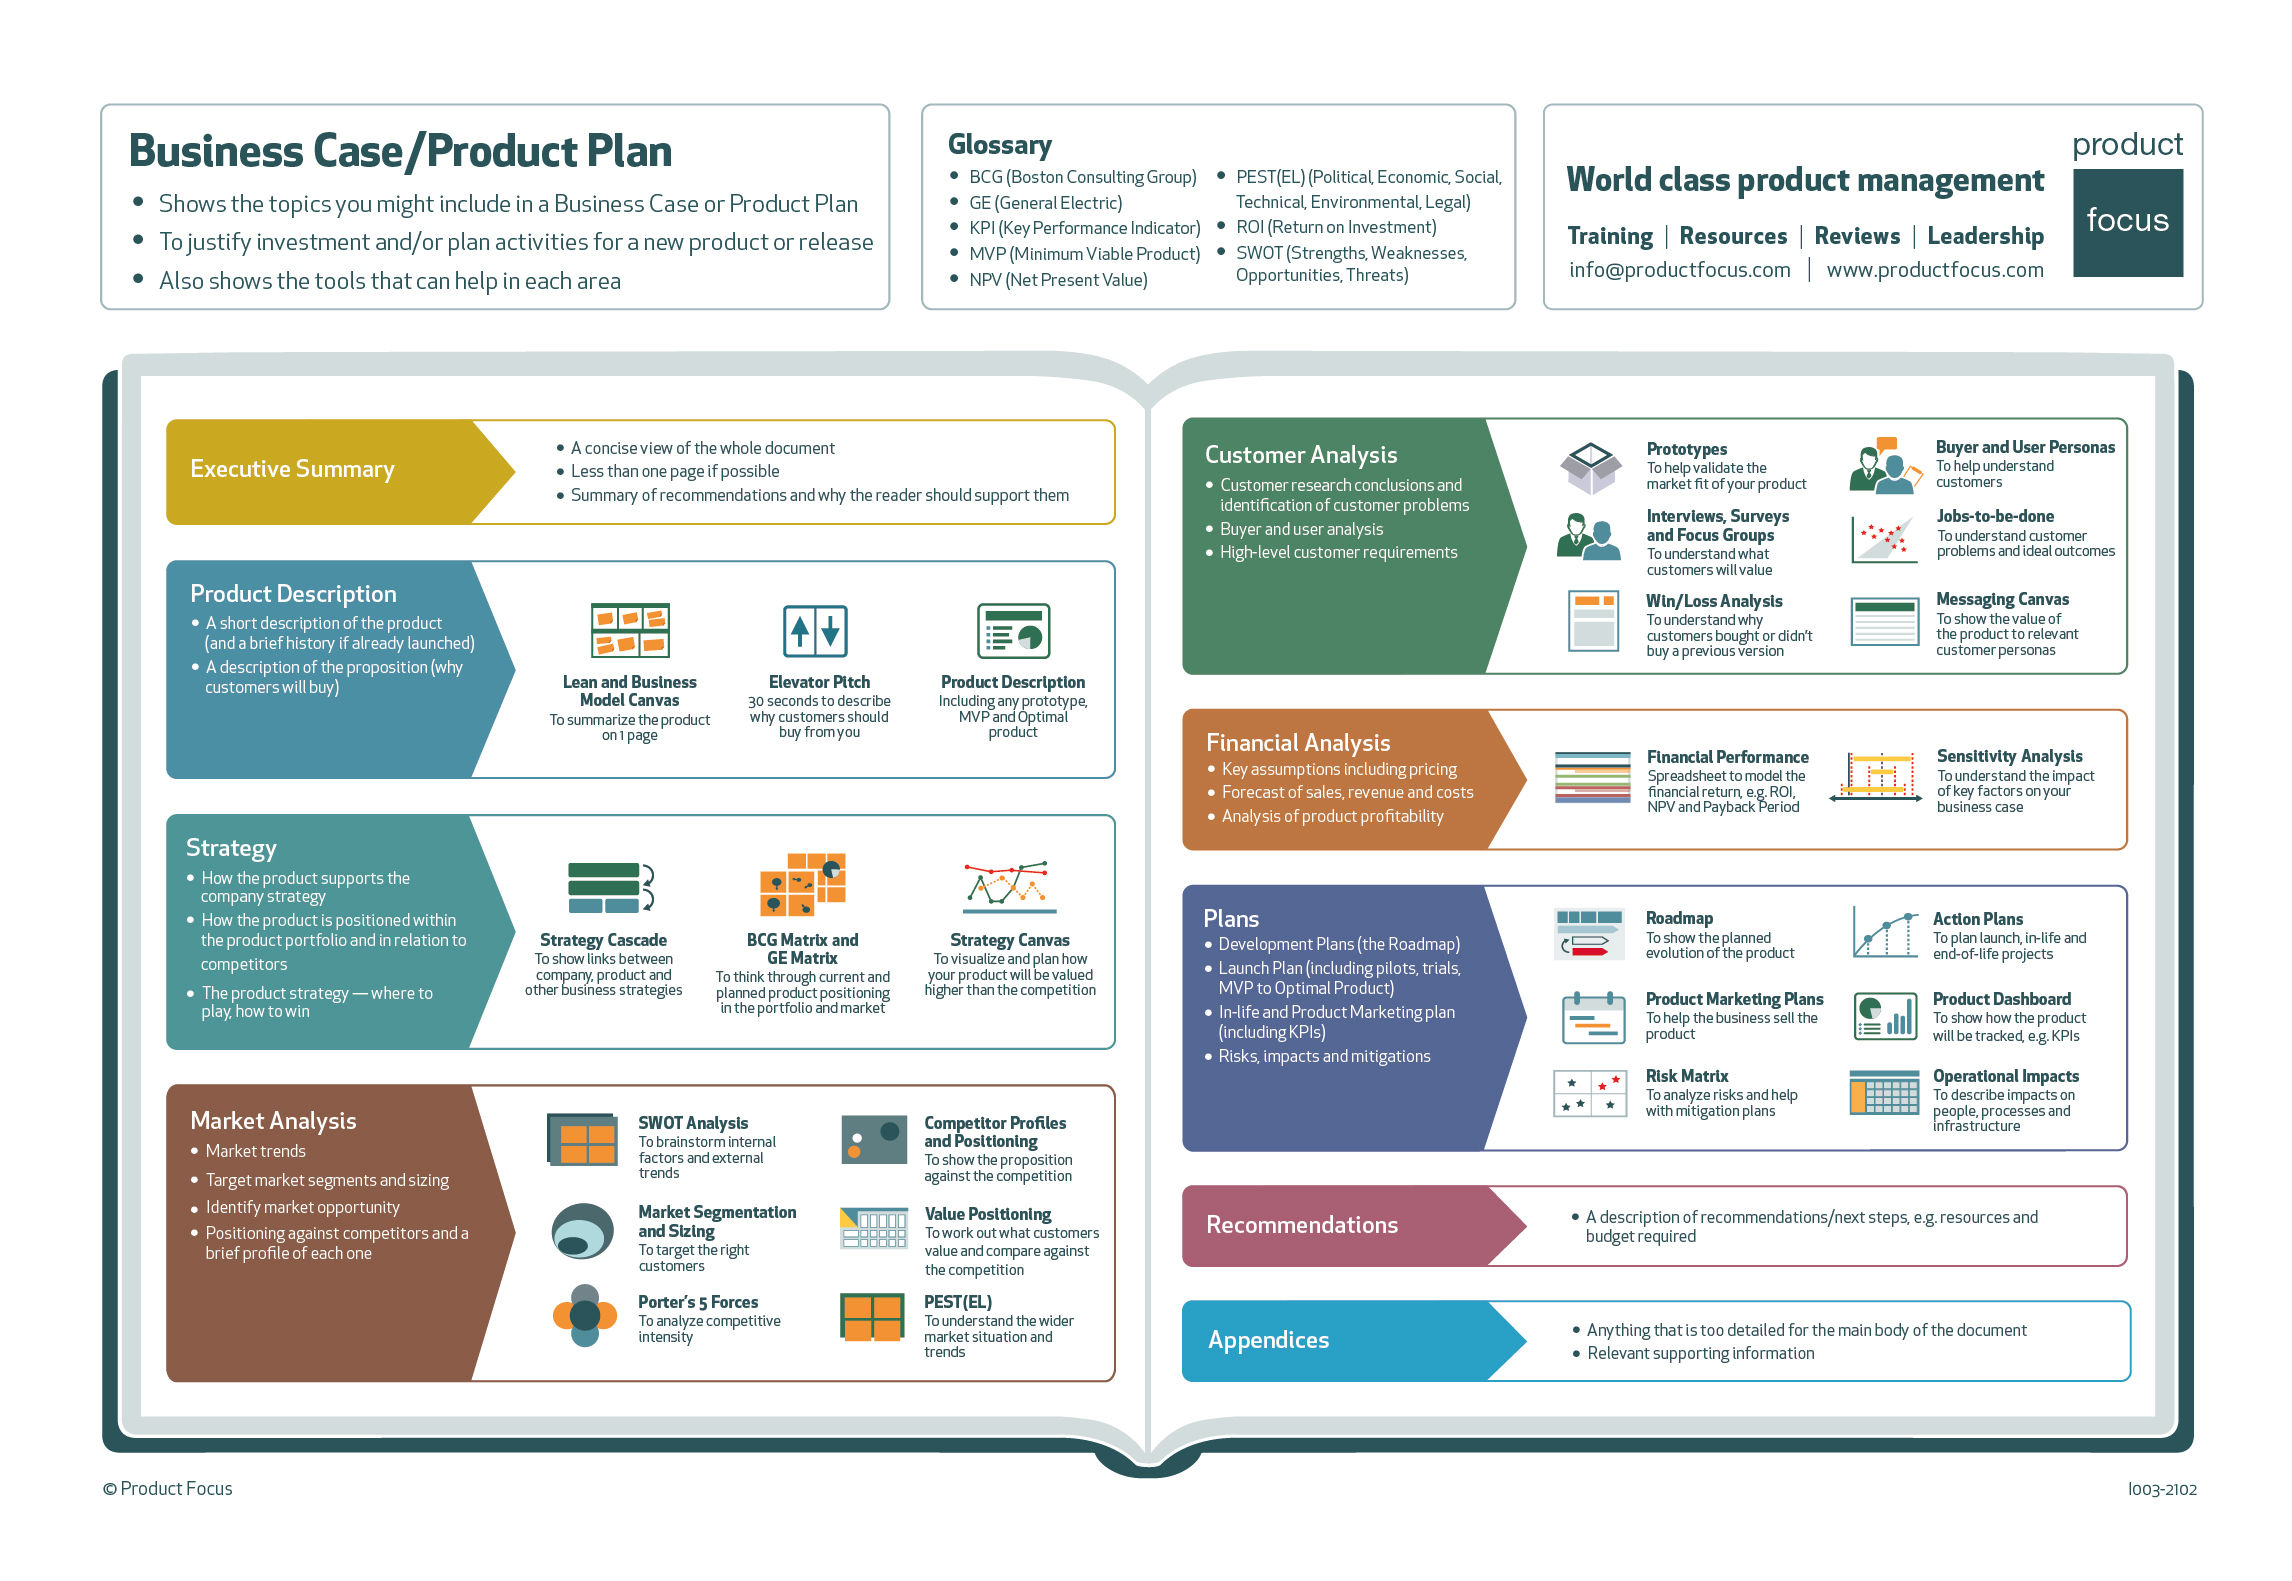 Business Case / Product Plan infographic